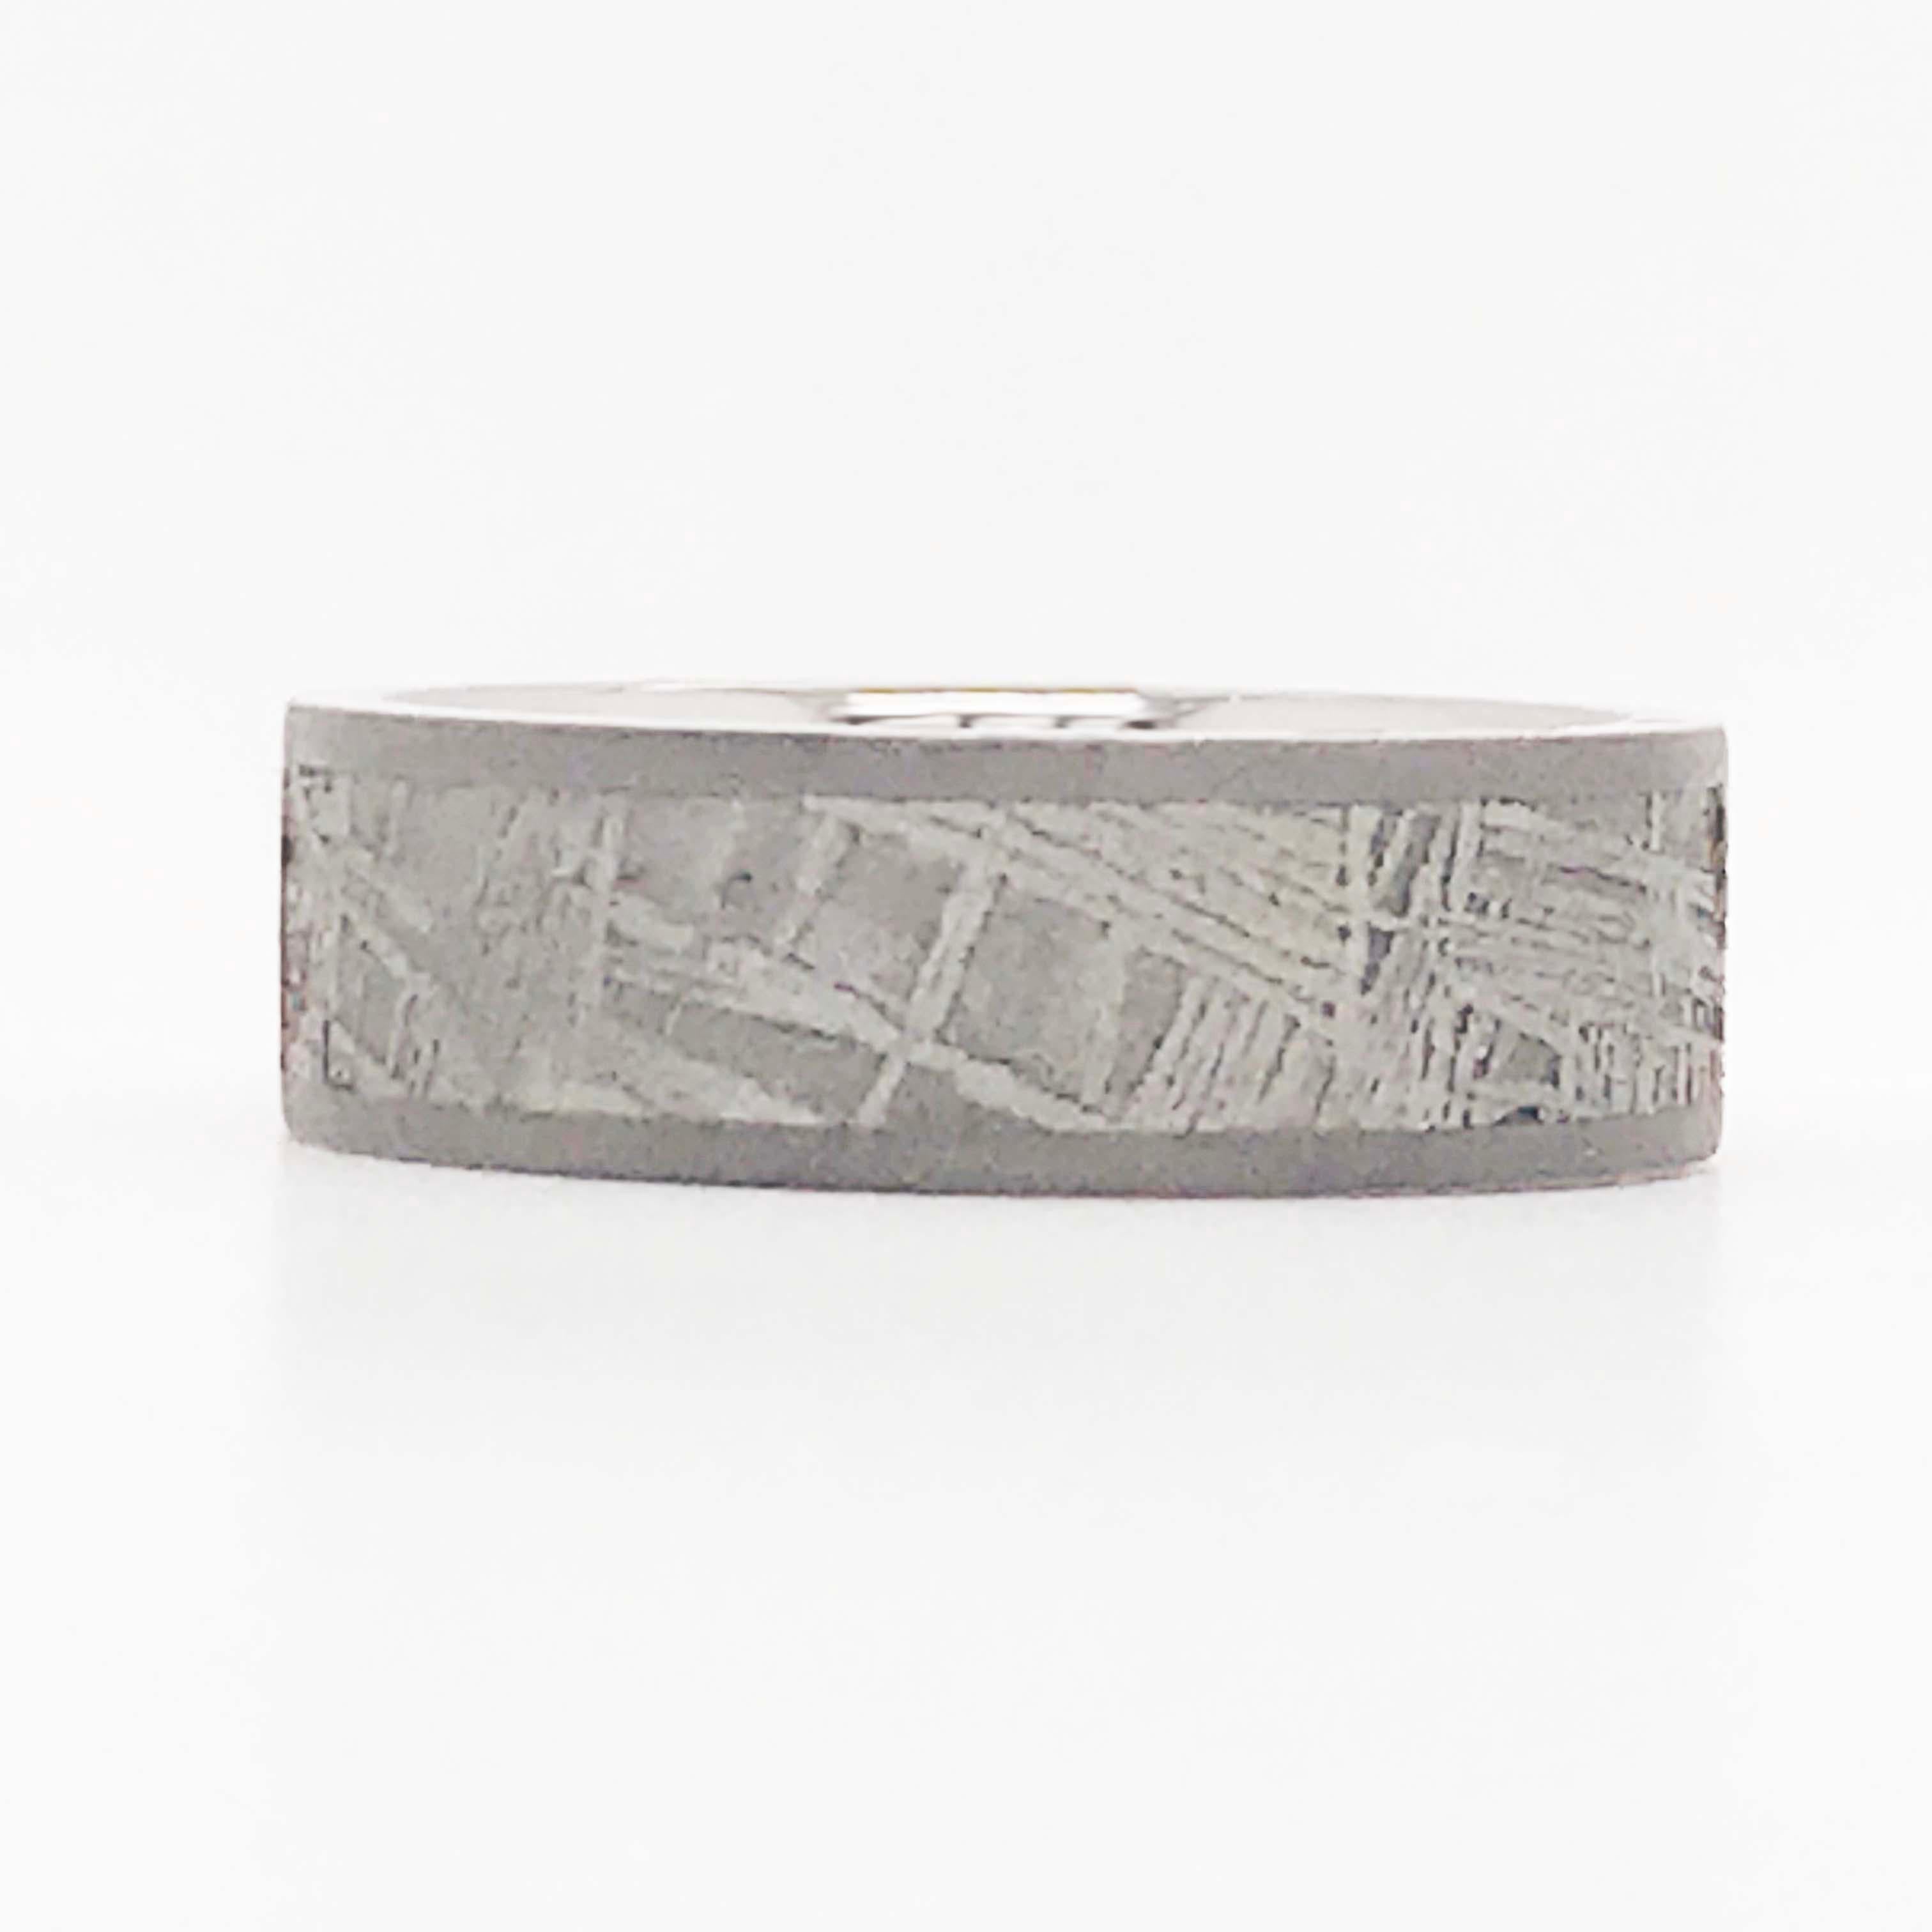 This custom titanium meteorite band ring is a durable, industrial, and unique design! The band is a flat band style titanium band with an inlay of a meteorite!  The band is 7 mm wide and made with a 5mm wide inlay of a genuine meteorite! The